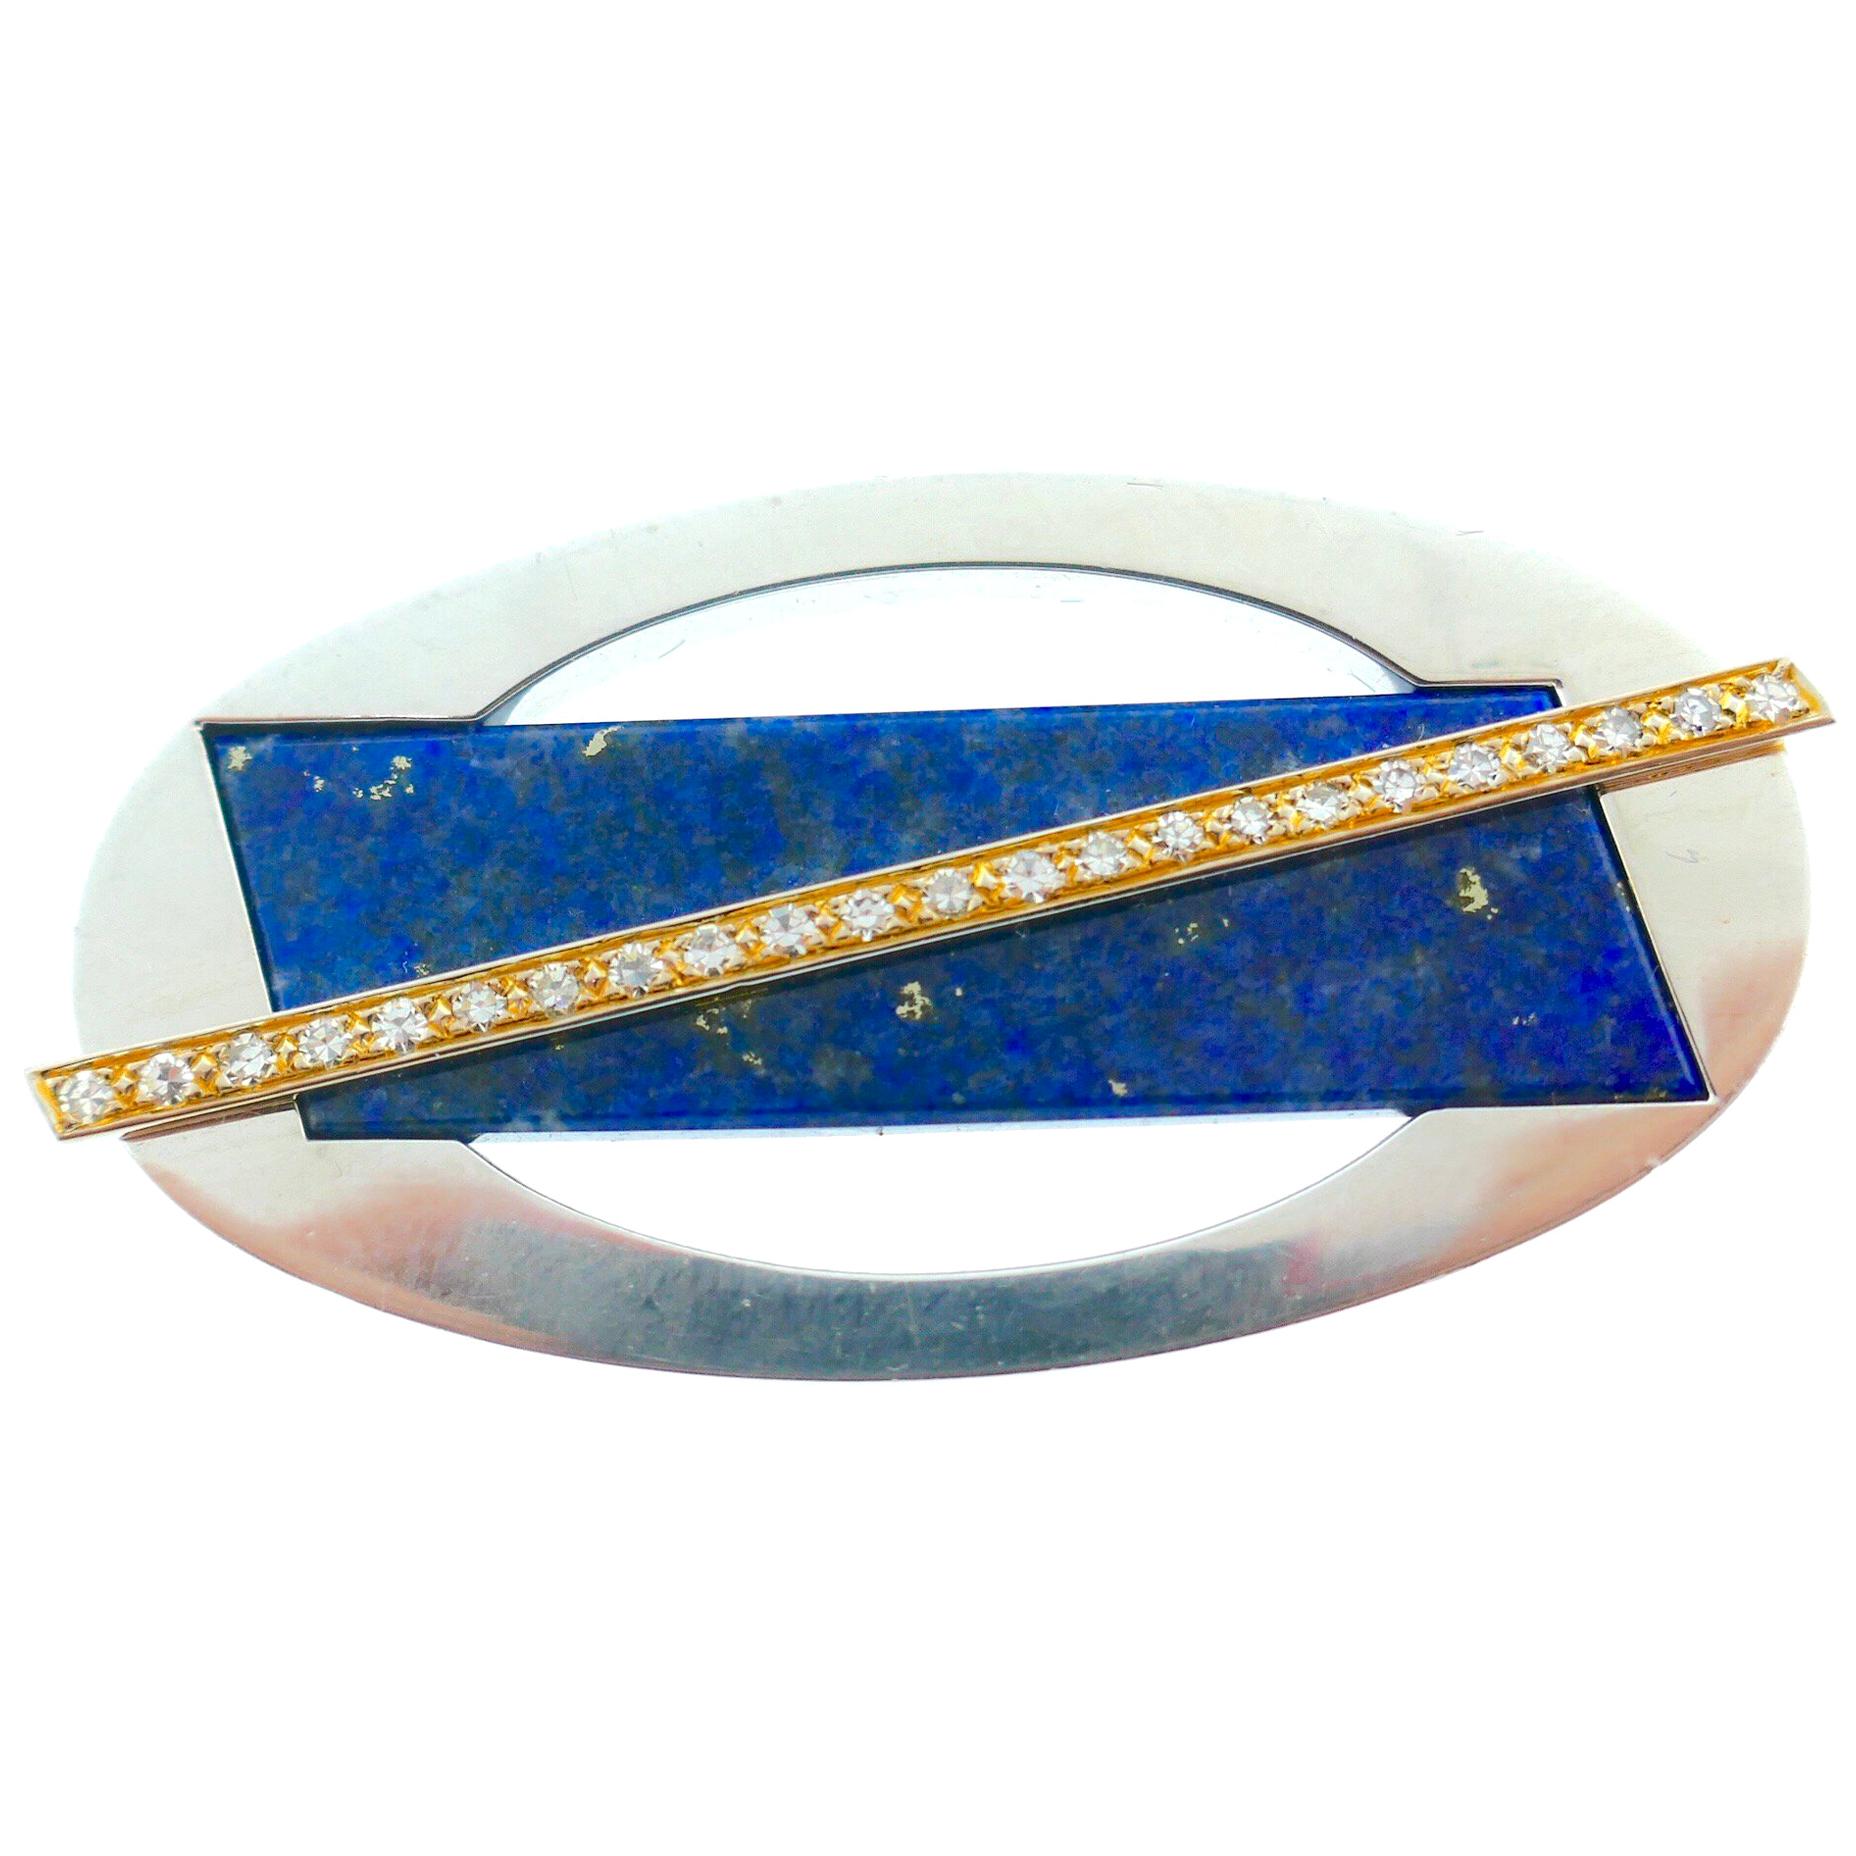 Cartier Yellow and White Gold Diamond and Lapis Brooch